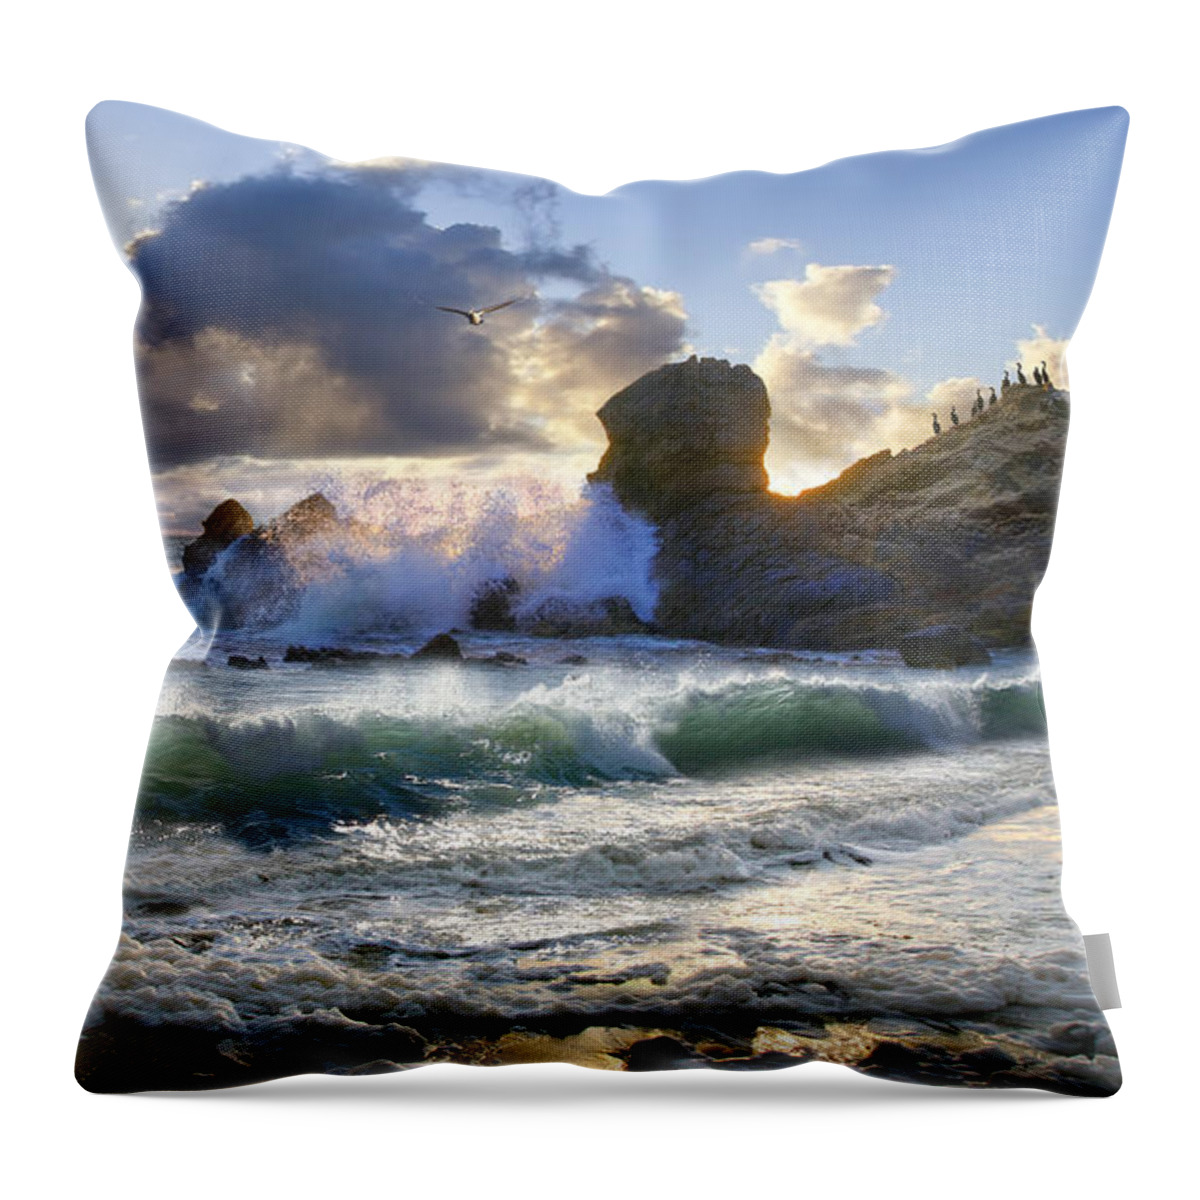 Ocean Throw Pillow featuring the photograph A Whisper In The Wind by Acropolis De Versailles